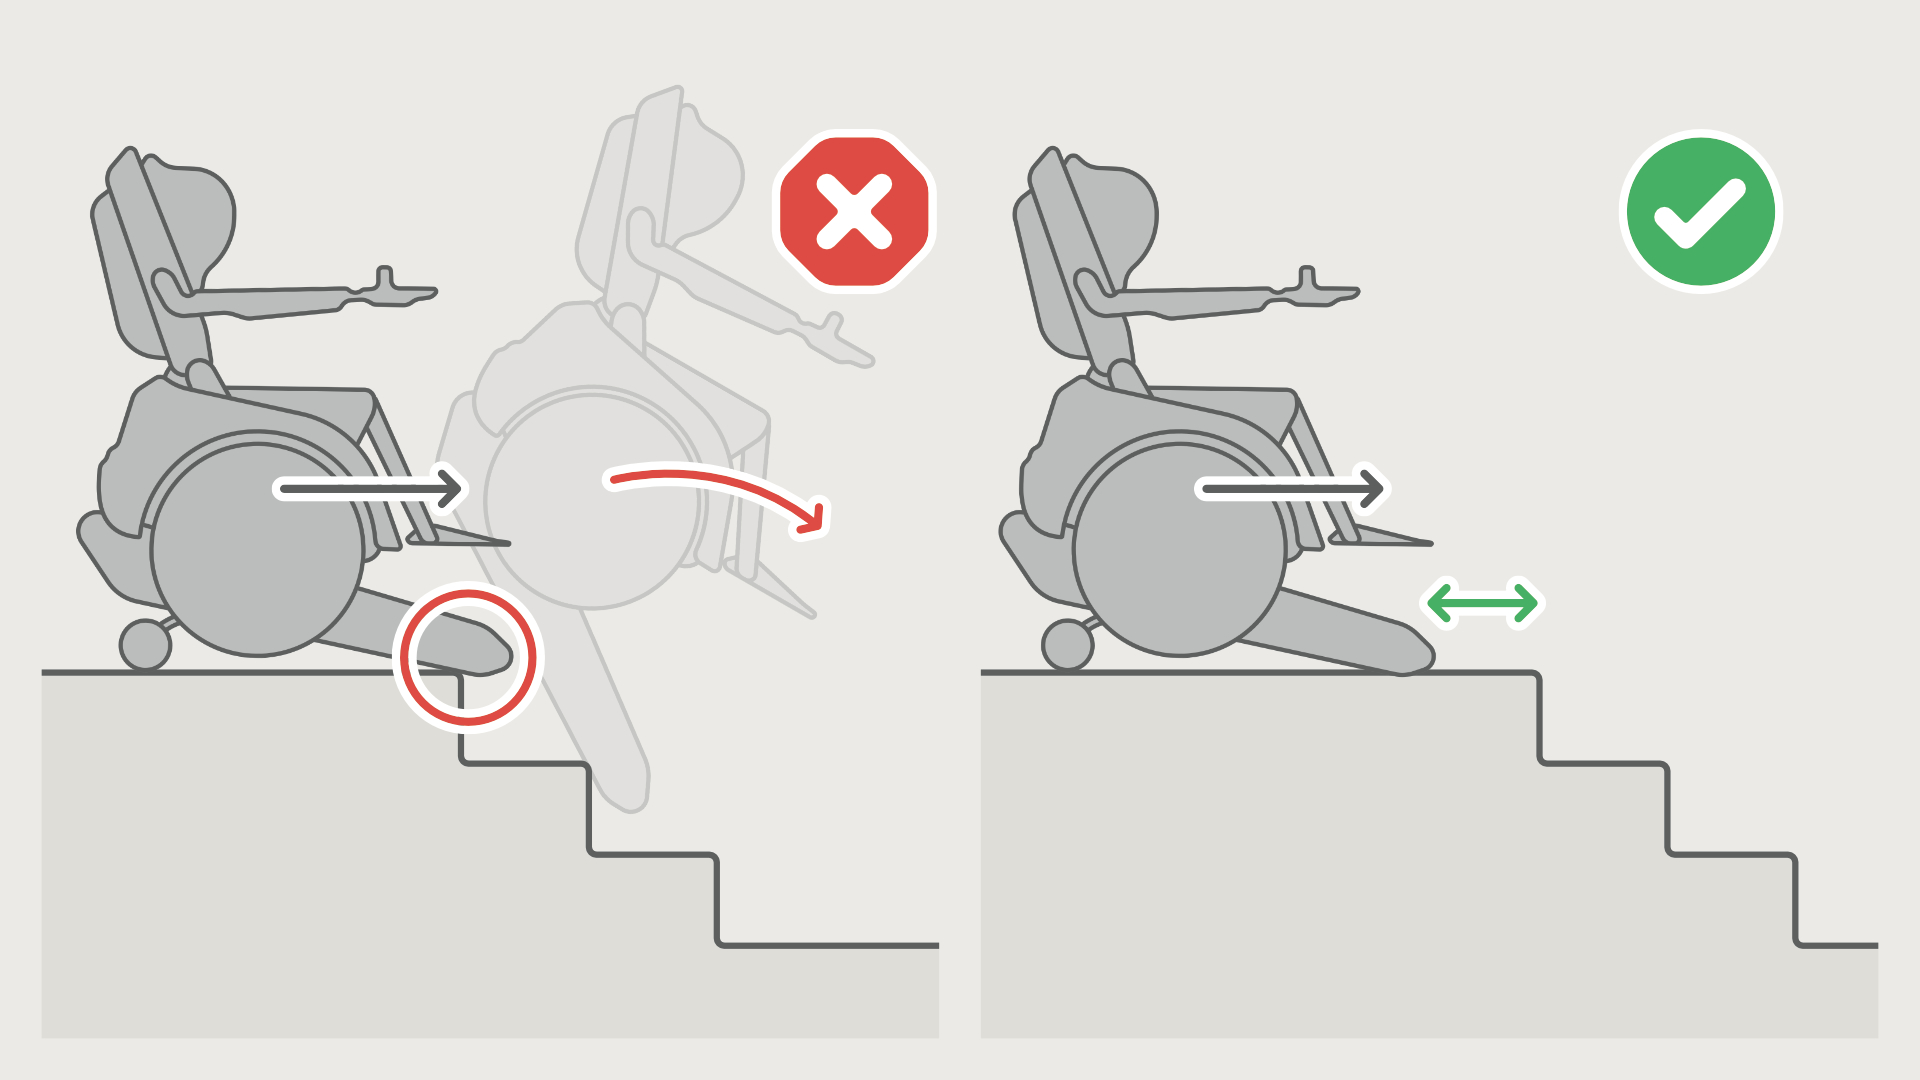 Only activate stair mode if the tips of the tracks are in front of the top edge of the stairs.